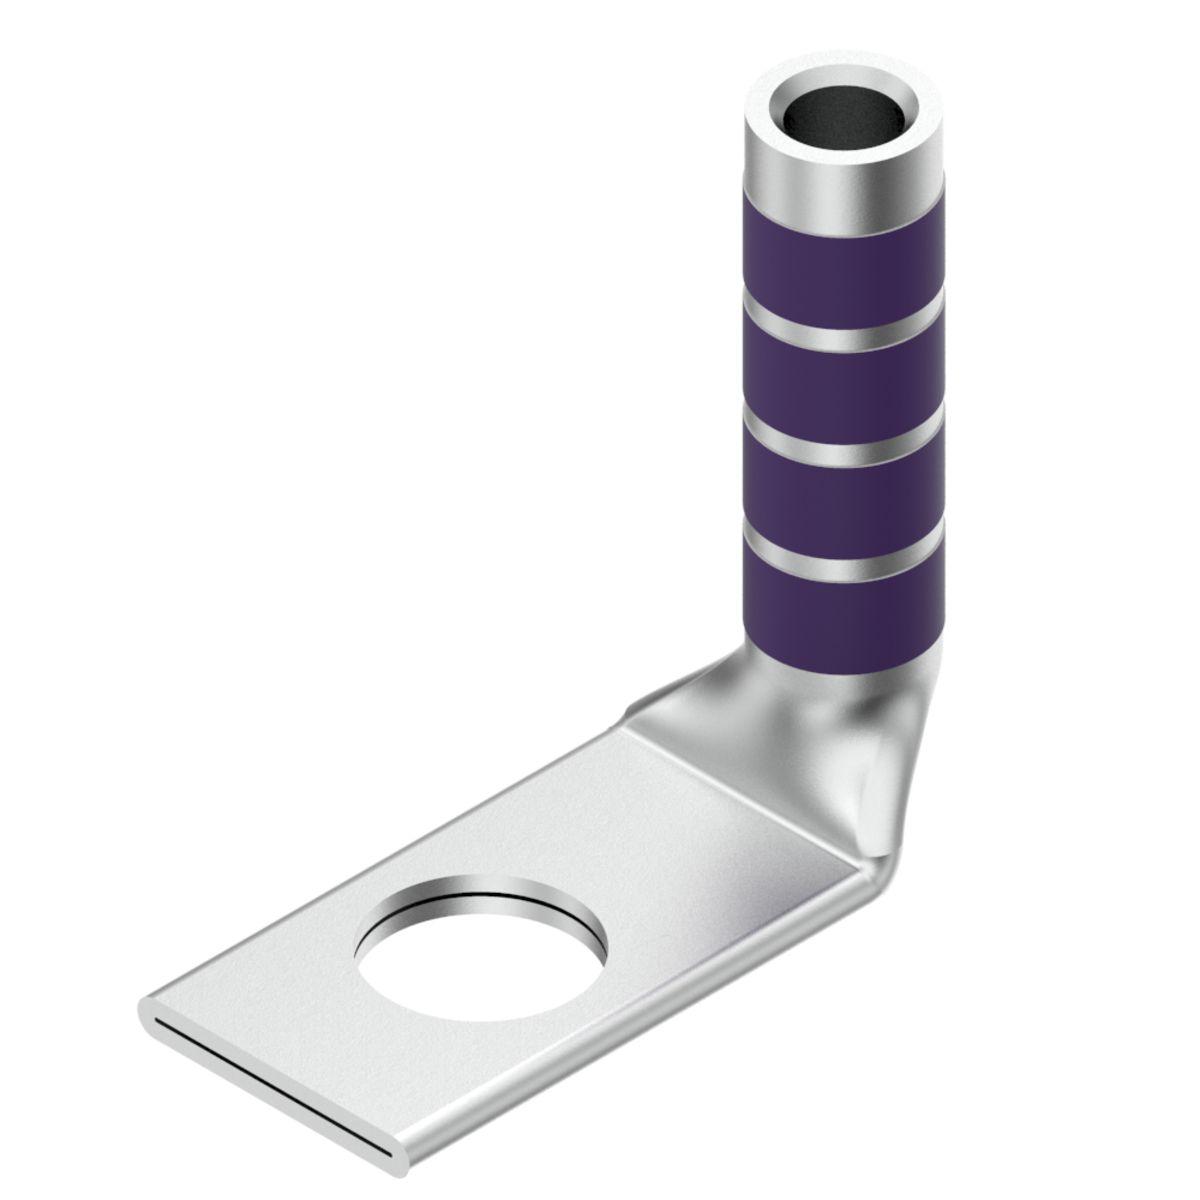 Hubbell YAZ28TC1290 4/0 AWG CU, One Hole, 1/2 Stud Size, Long Barrel, Inspection Window, Internal Chamfer, Tin Plated, UL/CSA, 90°C, Up to 35kV, Purple Color Code, 15 Die Index. 